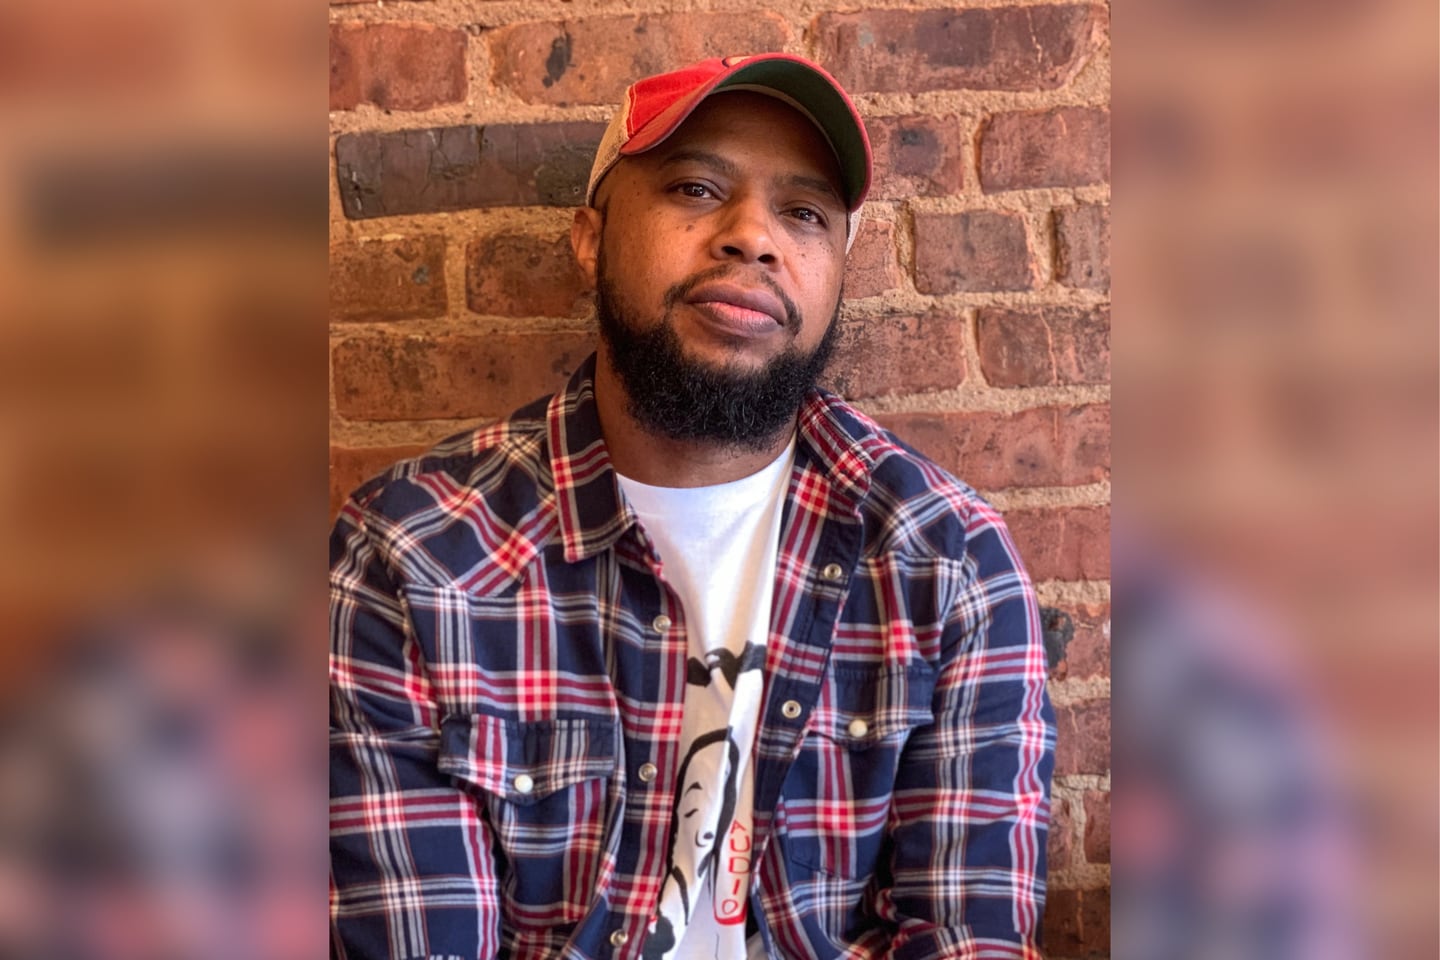 Talib Jasir is the CEO and founder of the Afros & Audio Podcast Festival, which serves Black podcasters. Jasir's festival will take place in Baltimore Oct. 21-22 at the Reginald F. Lewis Museum of Maryland African American History & Culture.